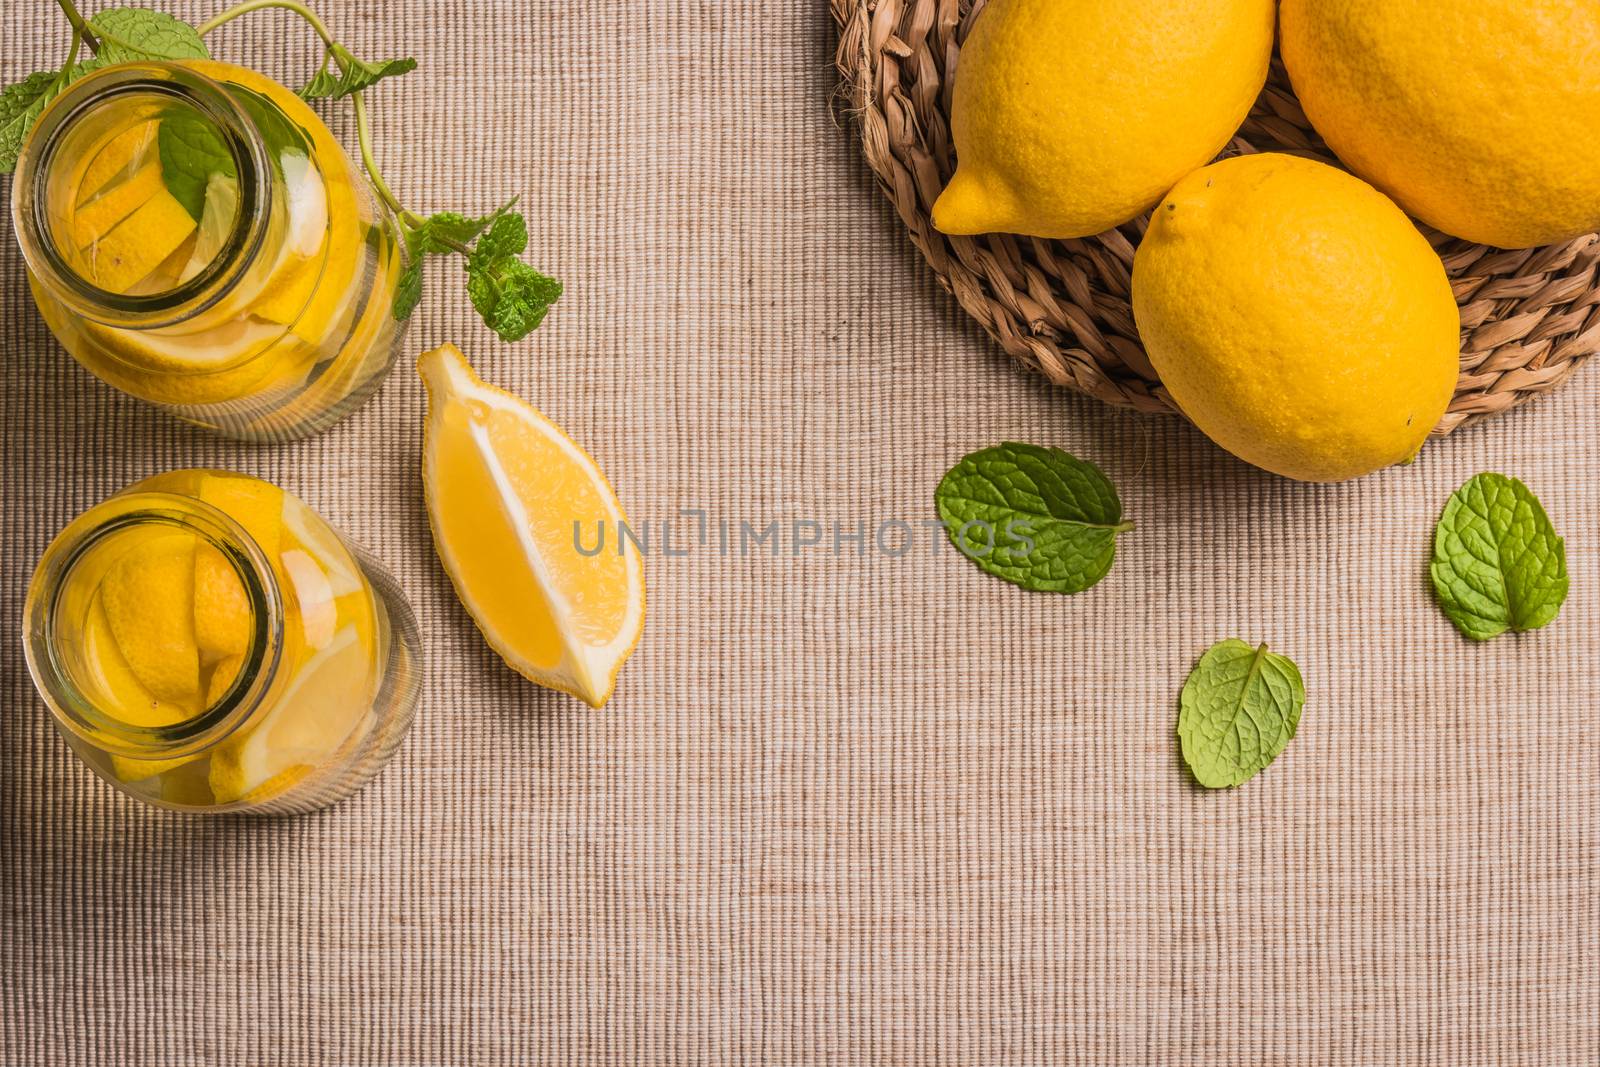 Glass of homemade lemonade with mint and lemon wedges. Top view with copy space.